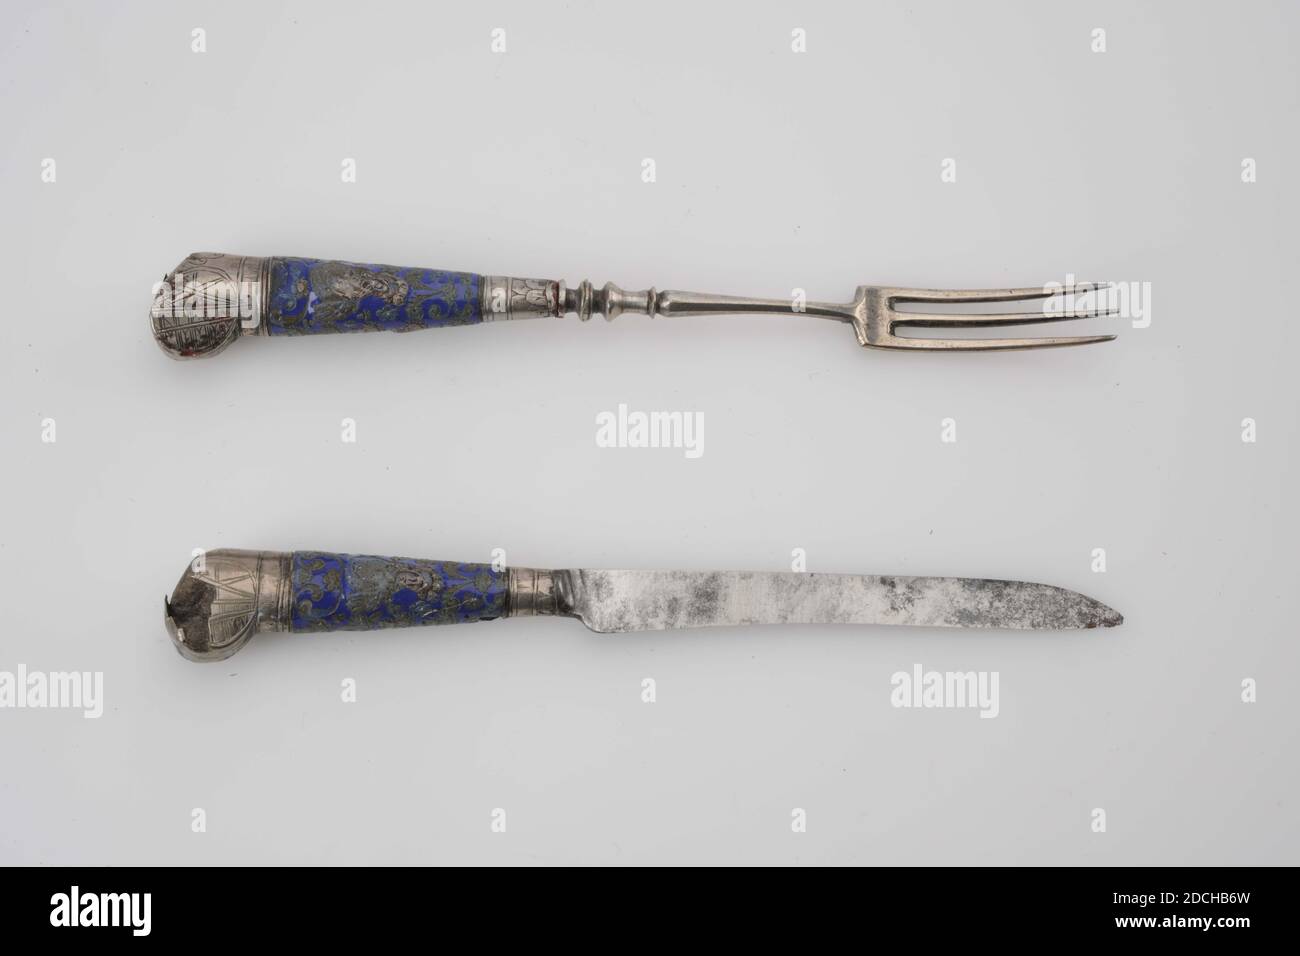 Anonymous, first half 18th century, leather, rayskin, silver, iron, enamel, sheath: 22 x 3.4 x 2.9cm 220 x 34 x 29mm, knife: 15.8 x 1.9 x 1.3cm 158 x 19 x 13mm, Fork: 15.9 x 1.9 x 1.3cm 159 x 19 x 13mm, weapon sign, Silver fork and iron blade with an enamelled handle, partly covered with silver fittings. A minerva bust between tendrils and flower vases and silver inlay are depicted on the handle. At the ends a silver button in which a weapon is engraved, with cross stripes on the left and two crossed swords on the right. The knife and fork are in a leather sheath with a loose cap, which is Stock Photo